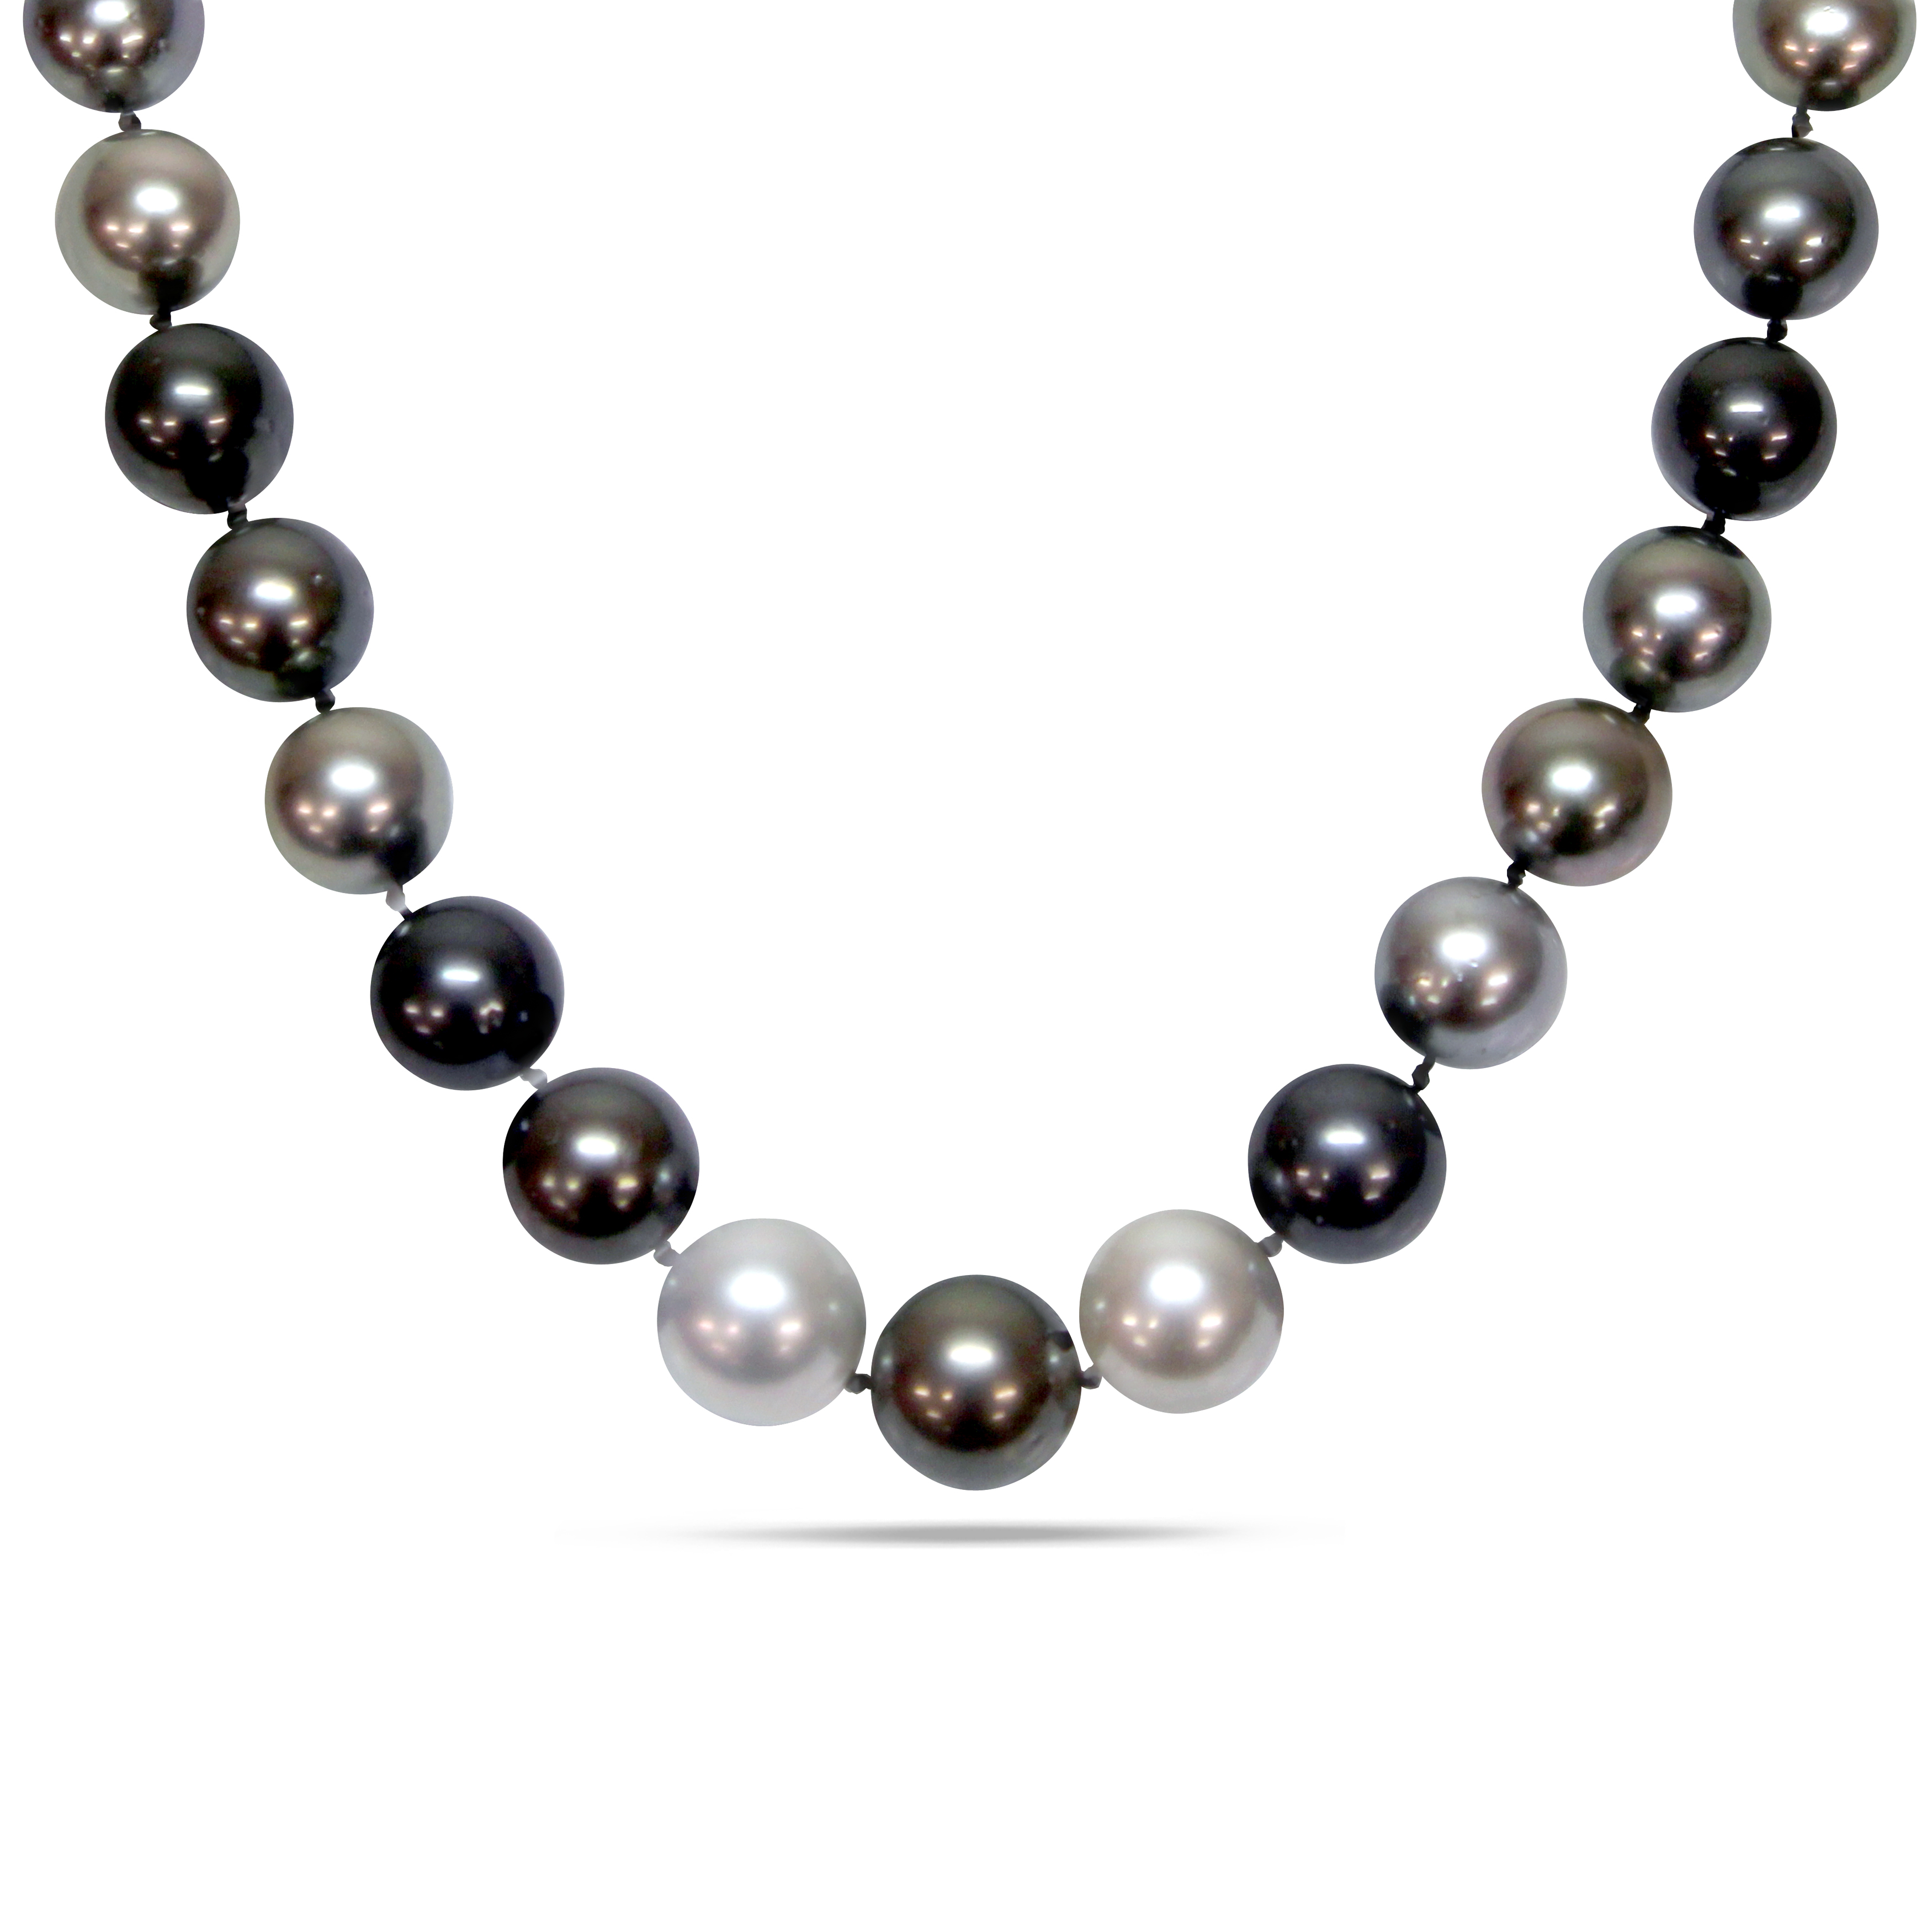 13-16 MM Graduated Multi-Color Tahitian Pearl Strand with 14k White Gold Diamond Accent Ball Clasp - 19.5 in